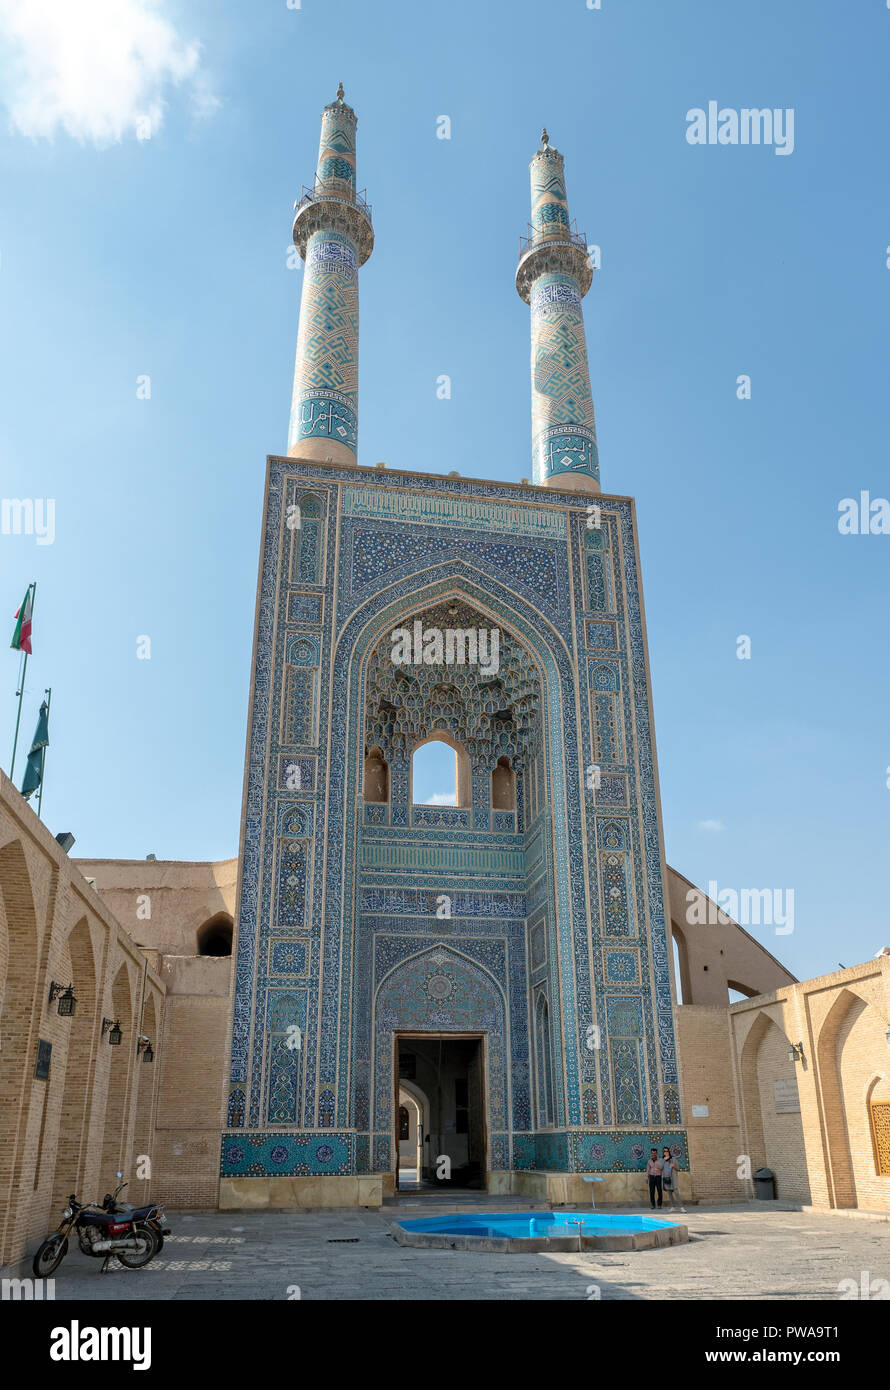 Jameh Mosque facade, Yazd, Iran. It has the tallest portal of all mosques in Iran Stock Photo